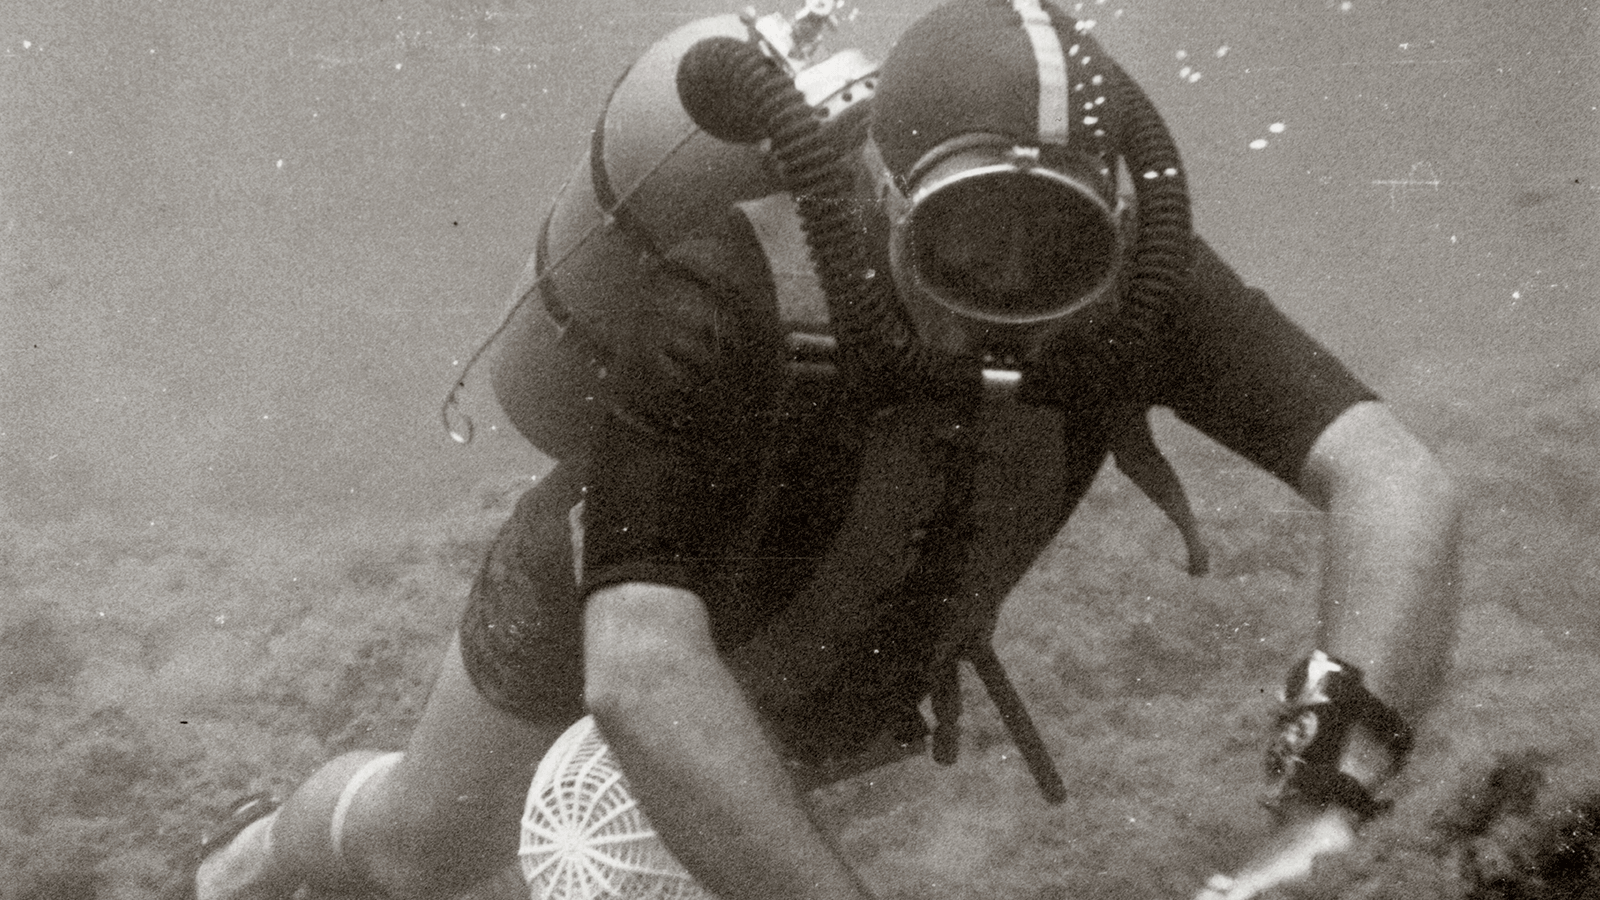 J.j. Fiechter Blancpain CEO 1950-1980 during one of his first dives in the South of France